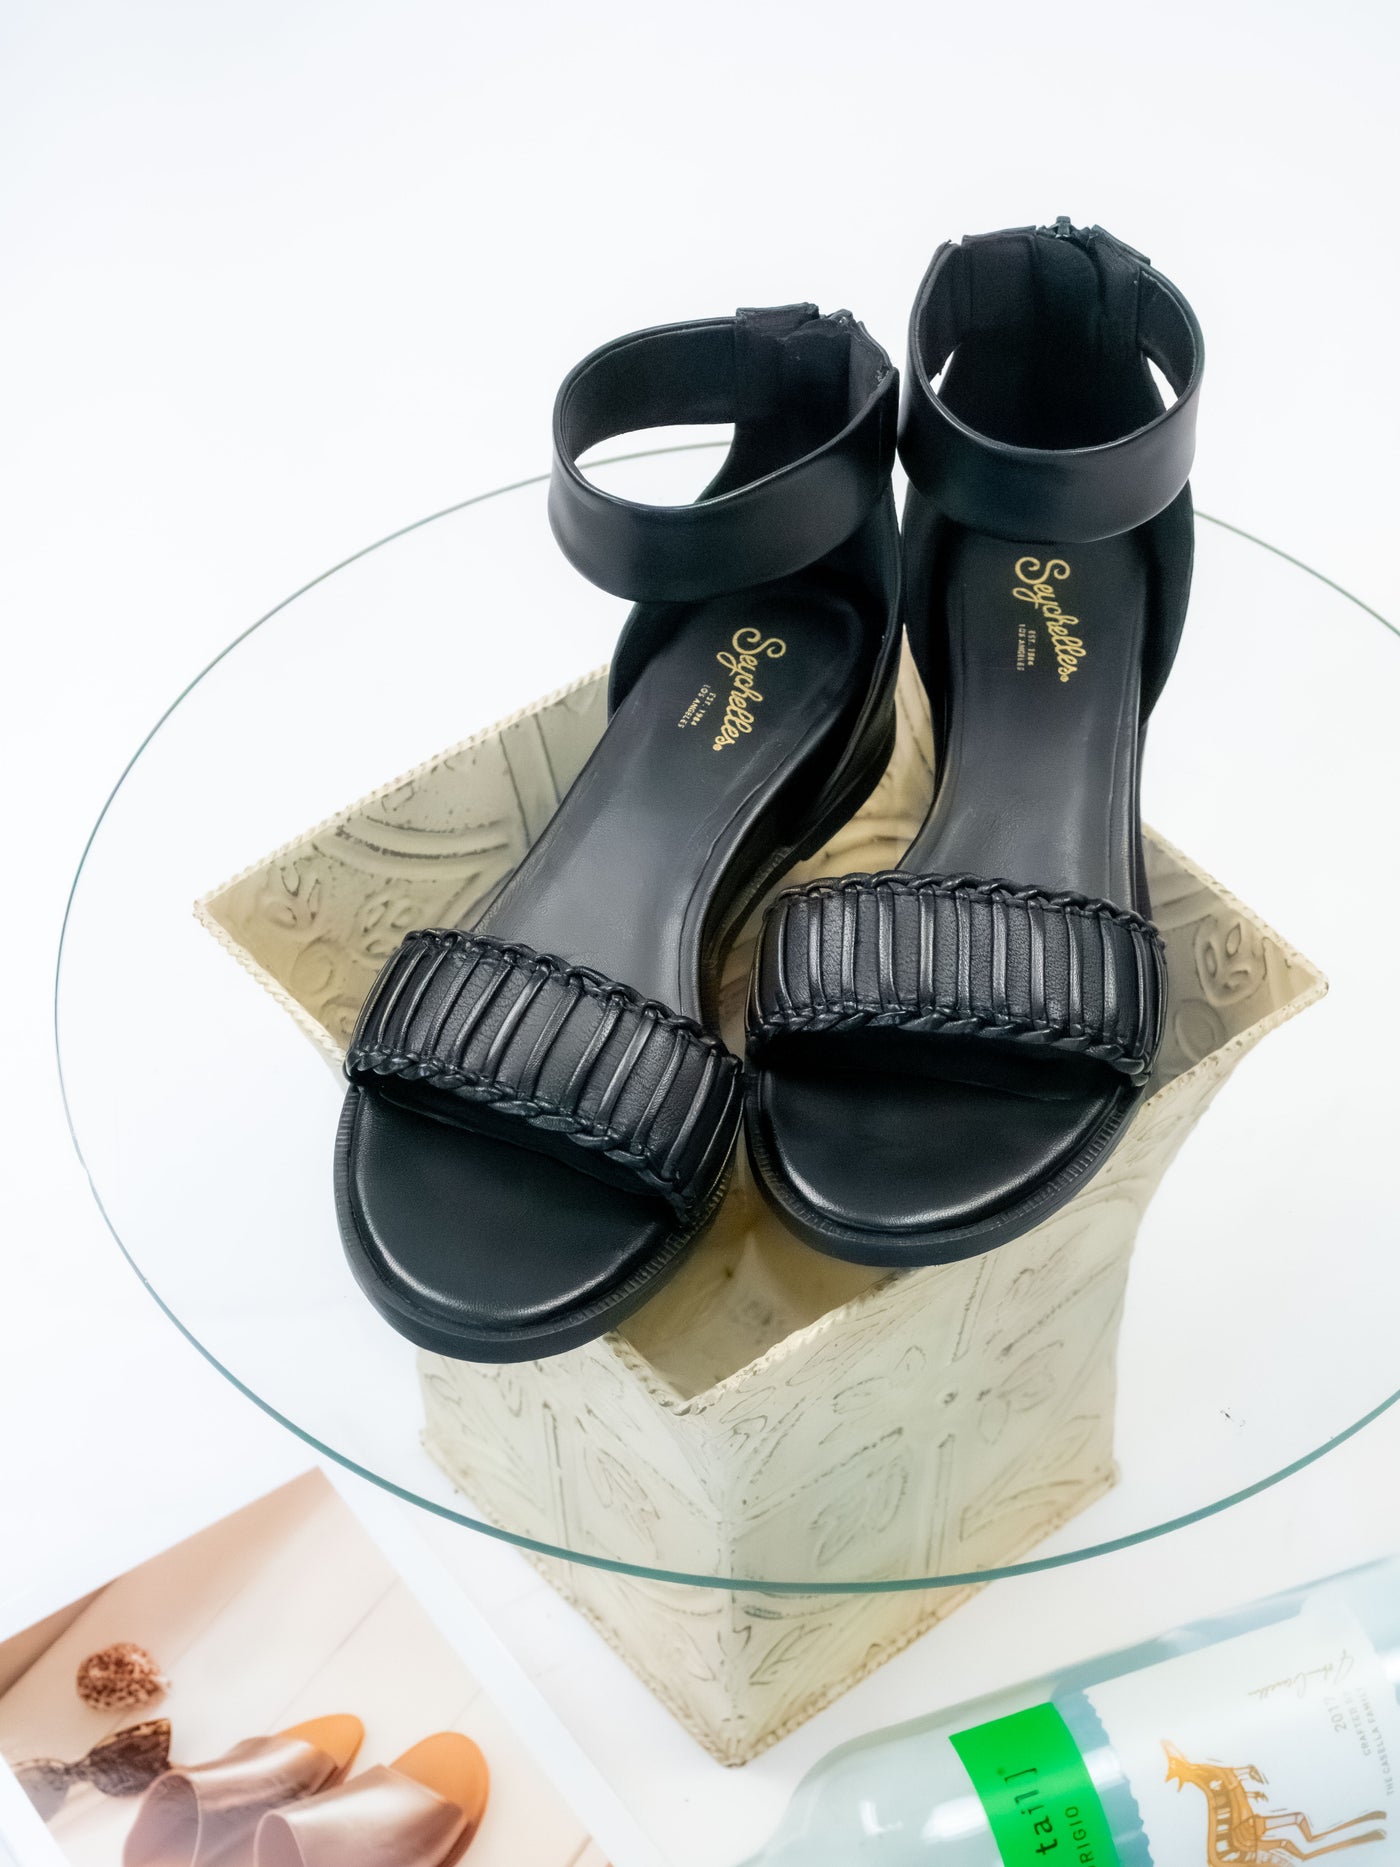 A pair of black leather wedge sandals.